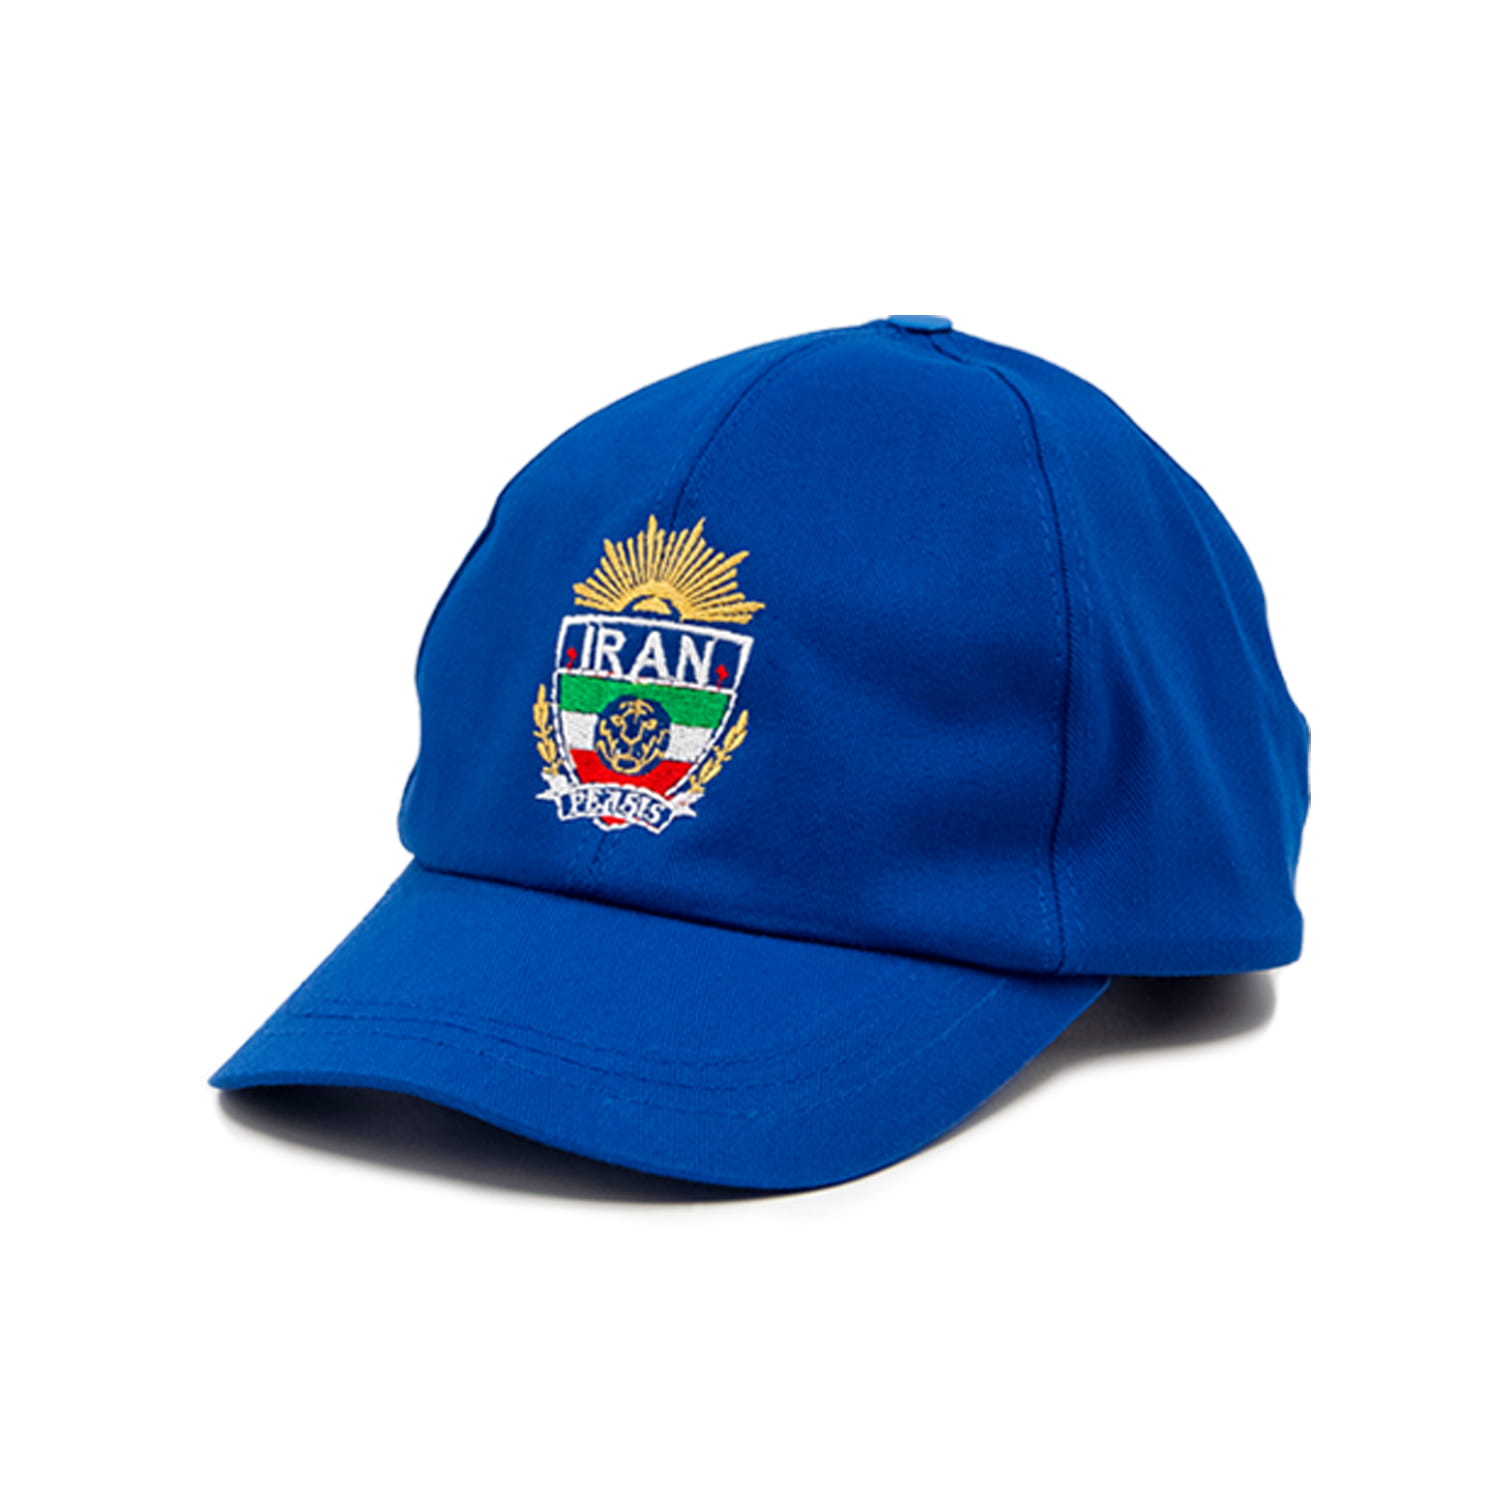 The Heritage Cap Blue - Persiscollection